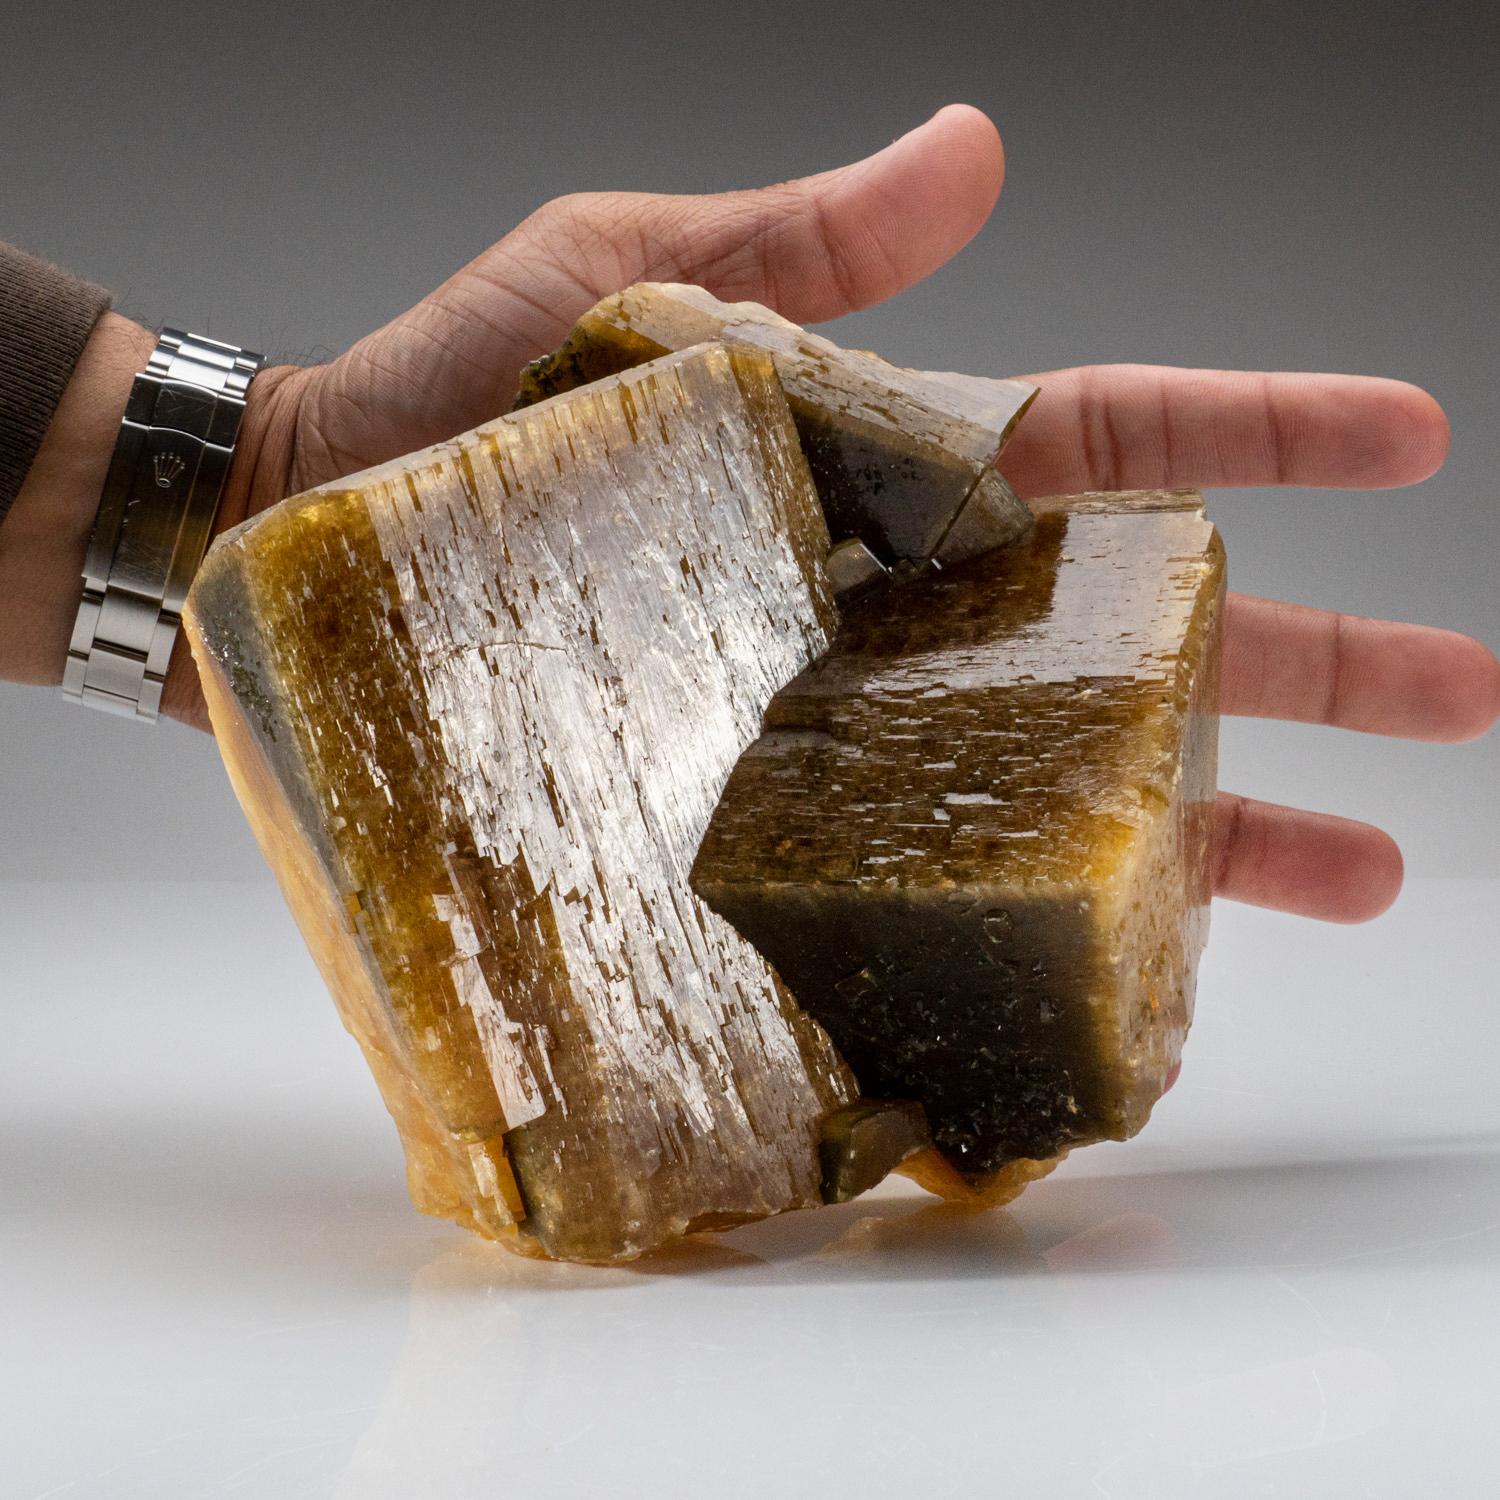 From Nandan County, Hechi, Guangxi, China

Large blocky crystals of yellow-brown barite crystals in parallel orientation with contact on the bottom edge where they were attached. The barites are translucent and show internal growth